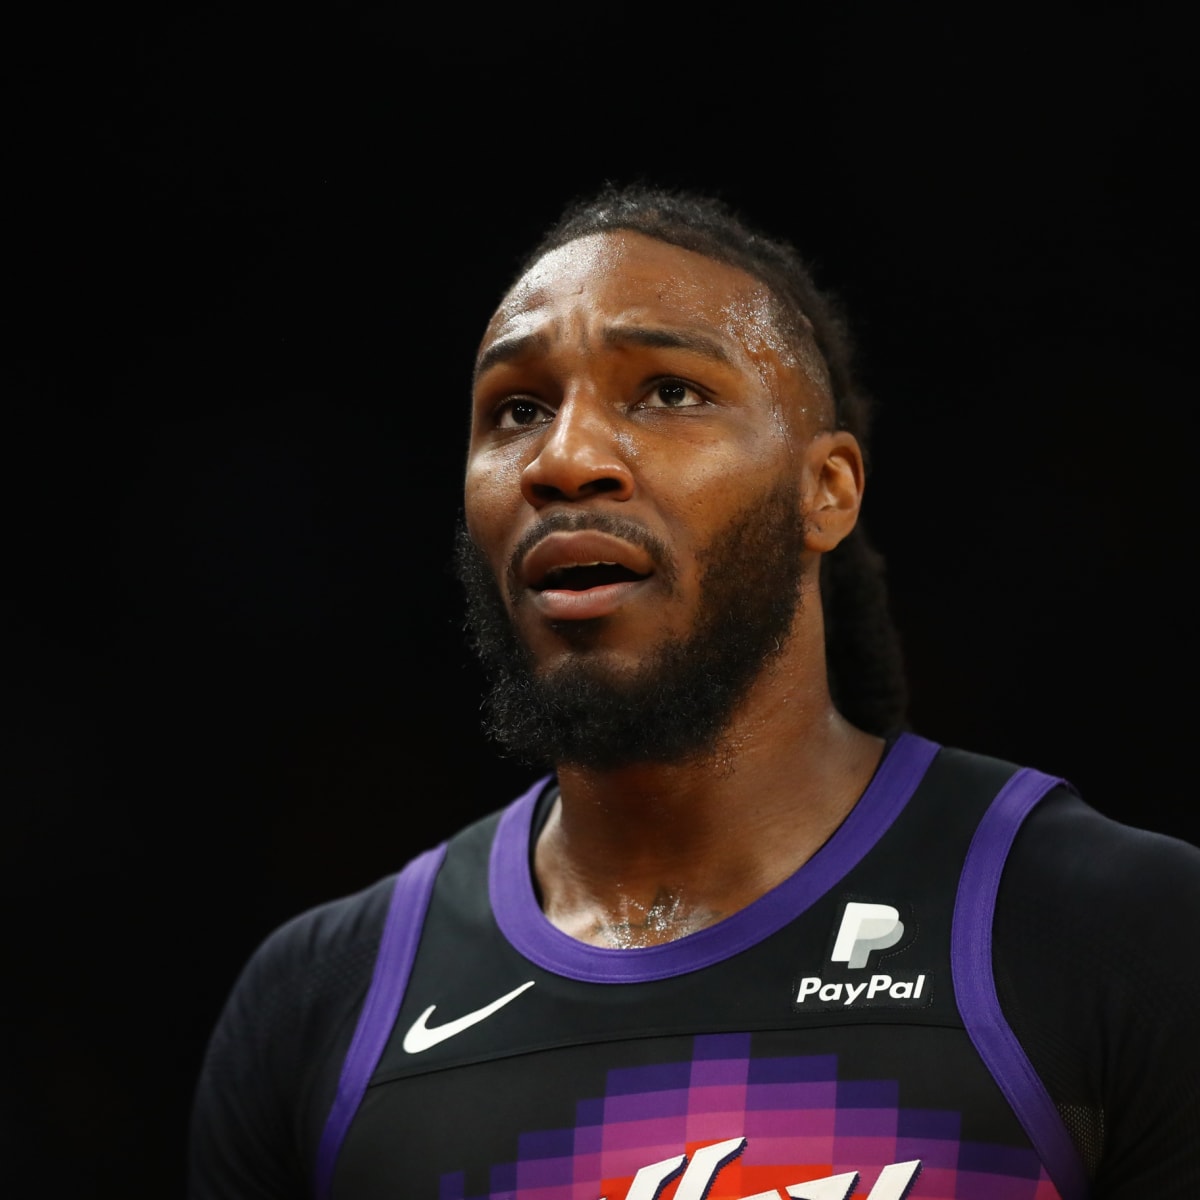 Trade grades for Jae Crowder Nets deal with Bucks